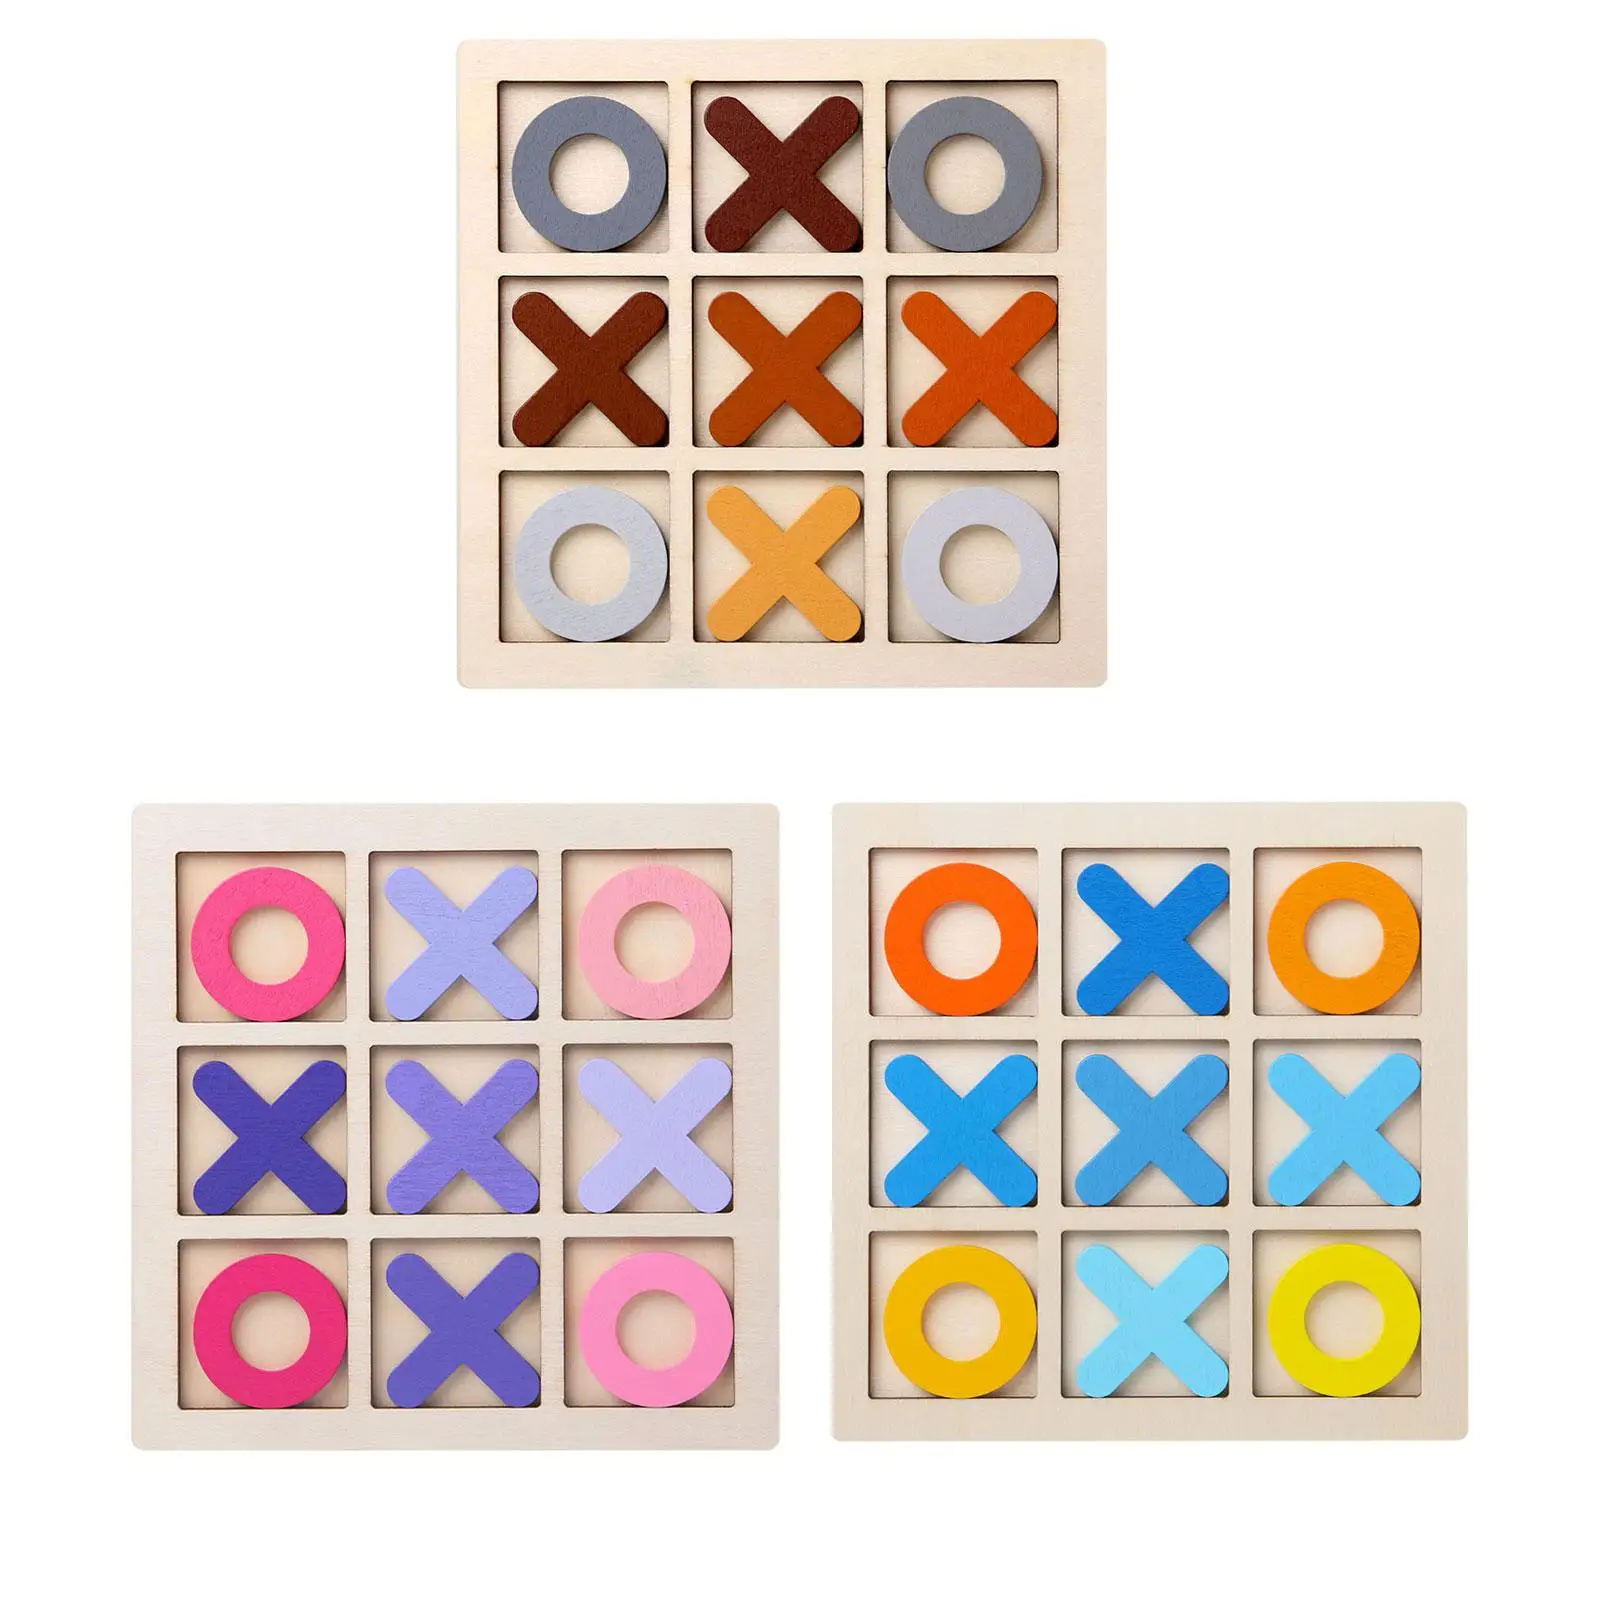 

Wooden Tic TAC Toe Game Noughts and Crosses Chess Board Game XO Table Toy for Outdoor Indoor Kids Families Coffee Table Decor